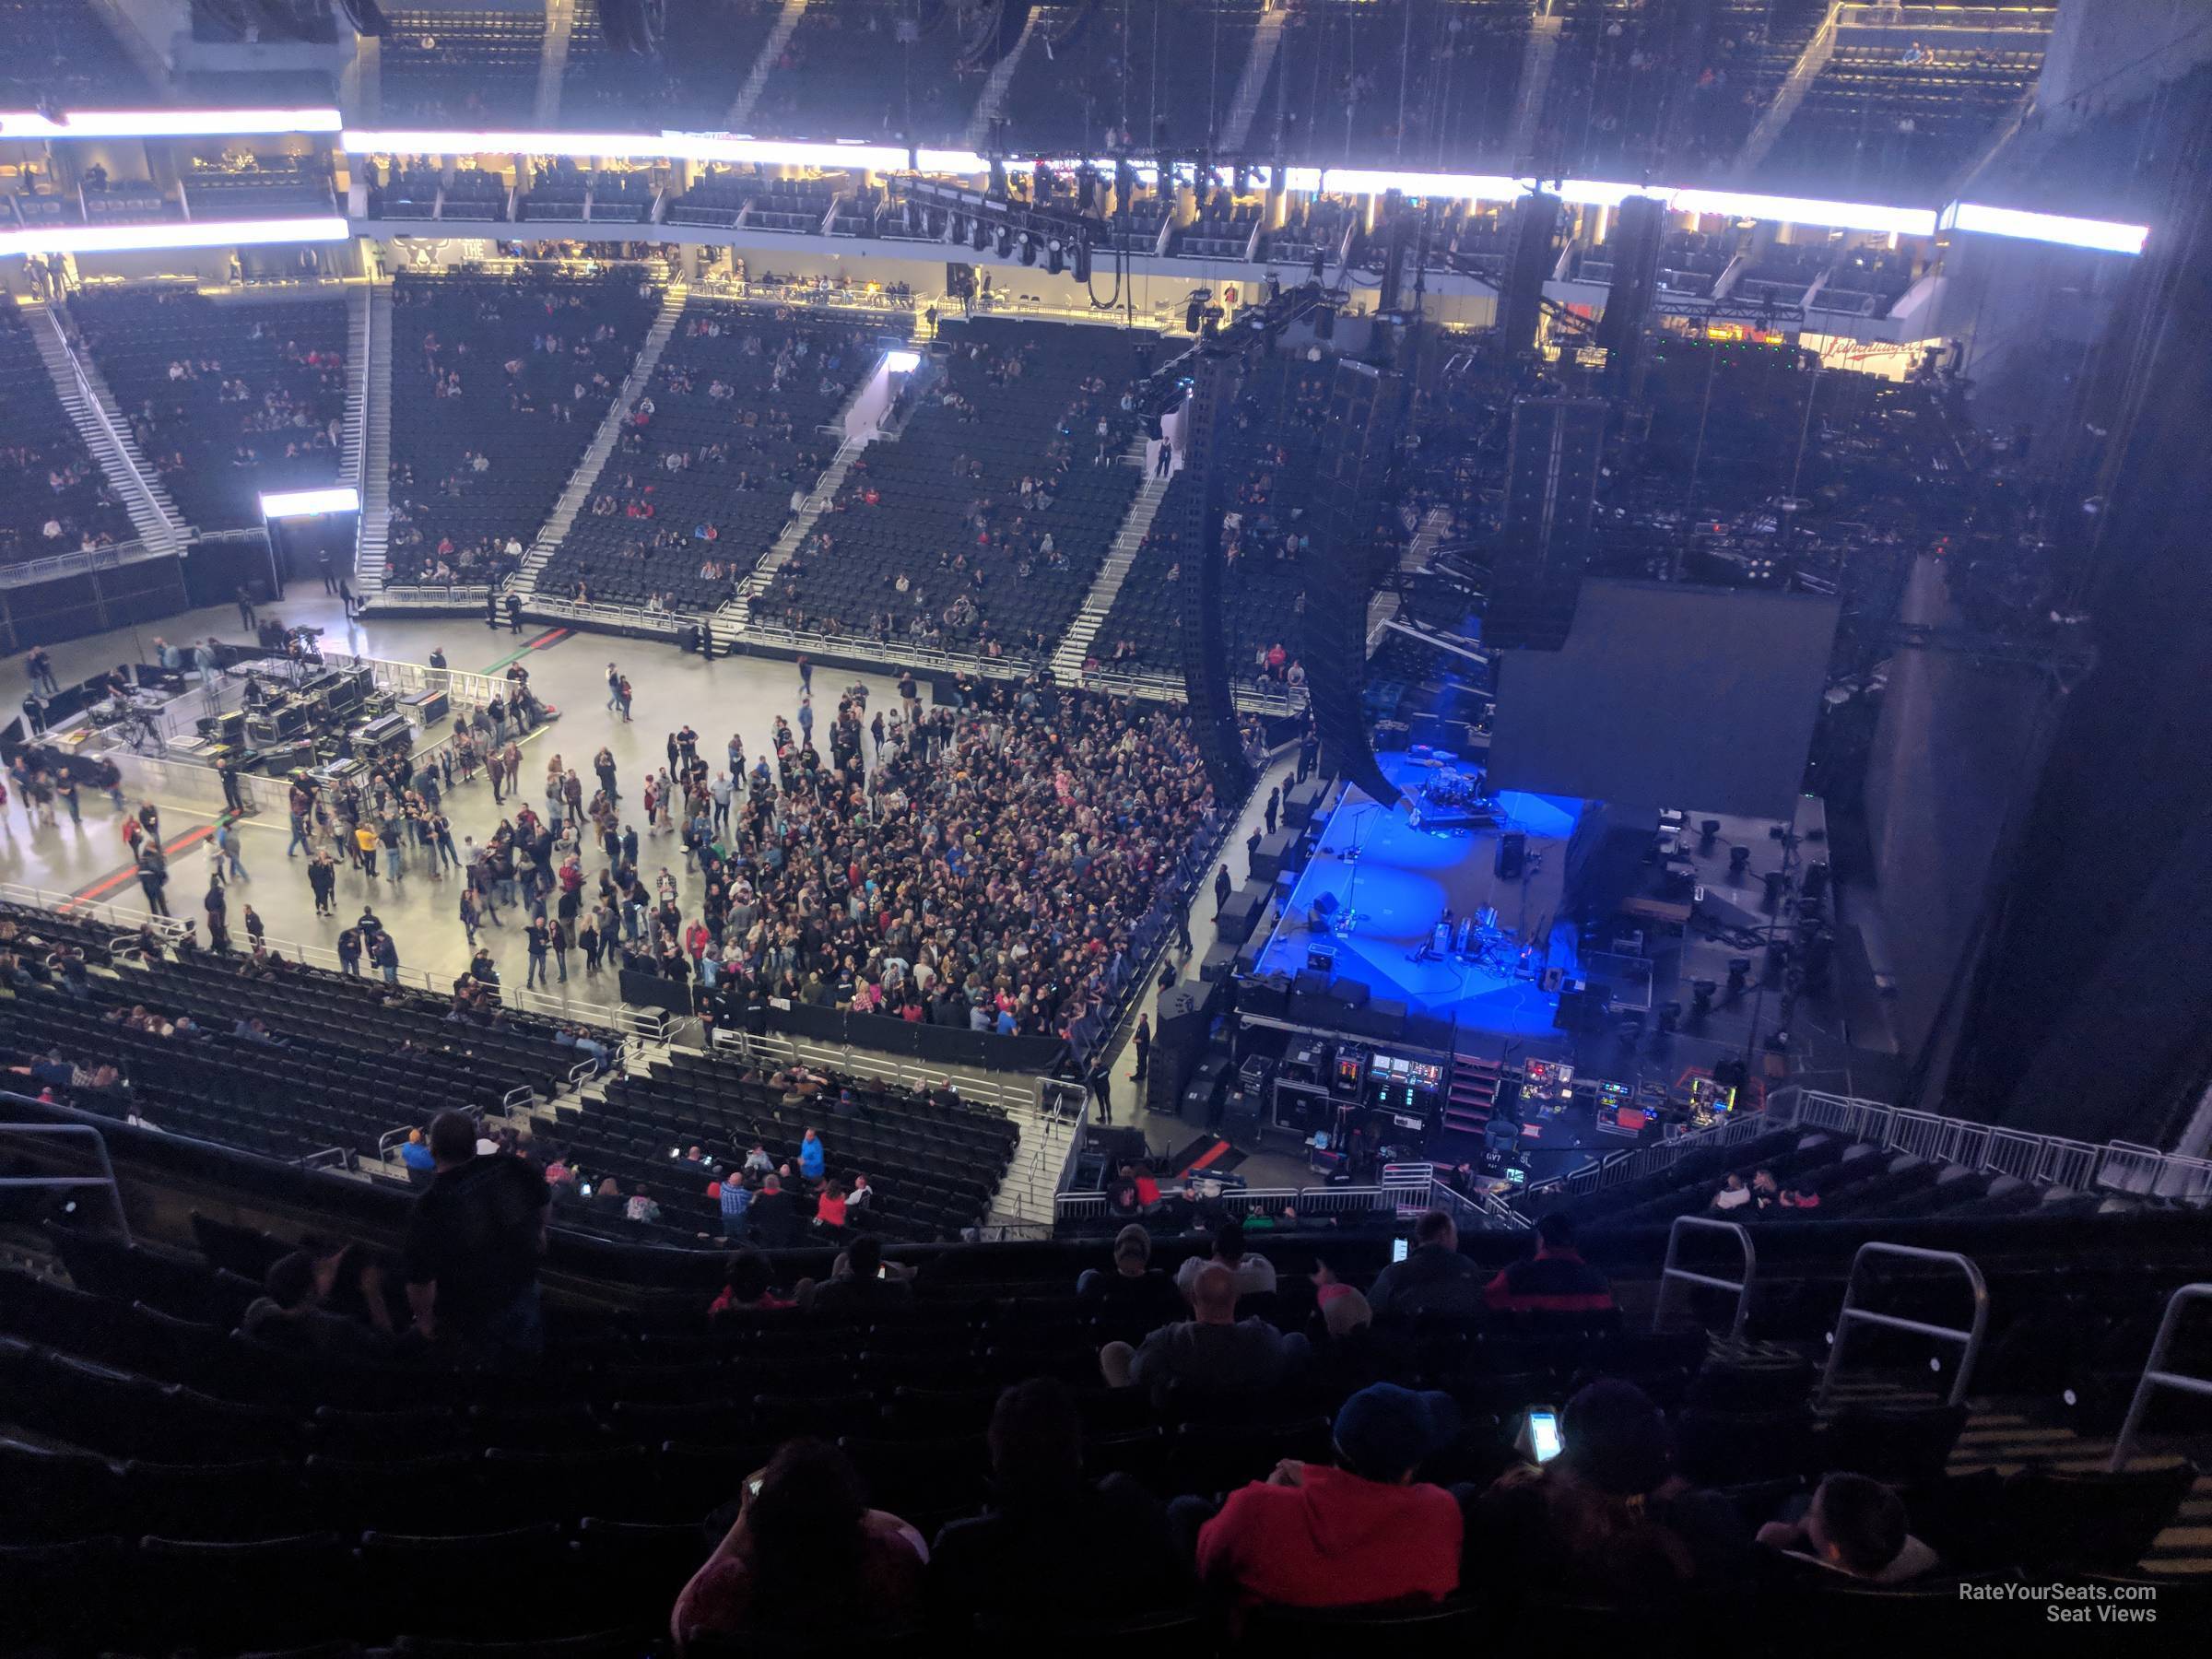 Section 220 at Fiserv Forum for Concerts